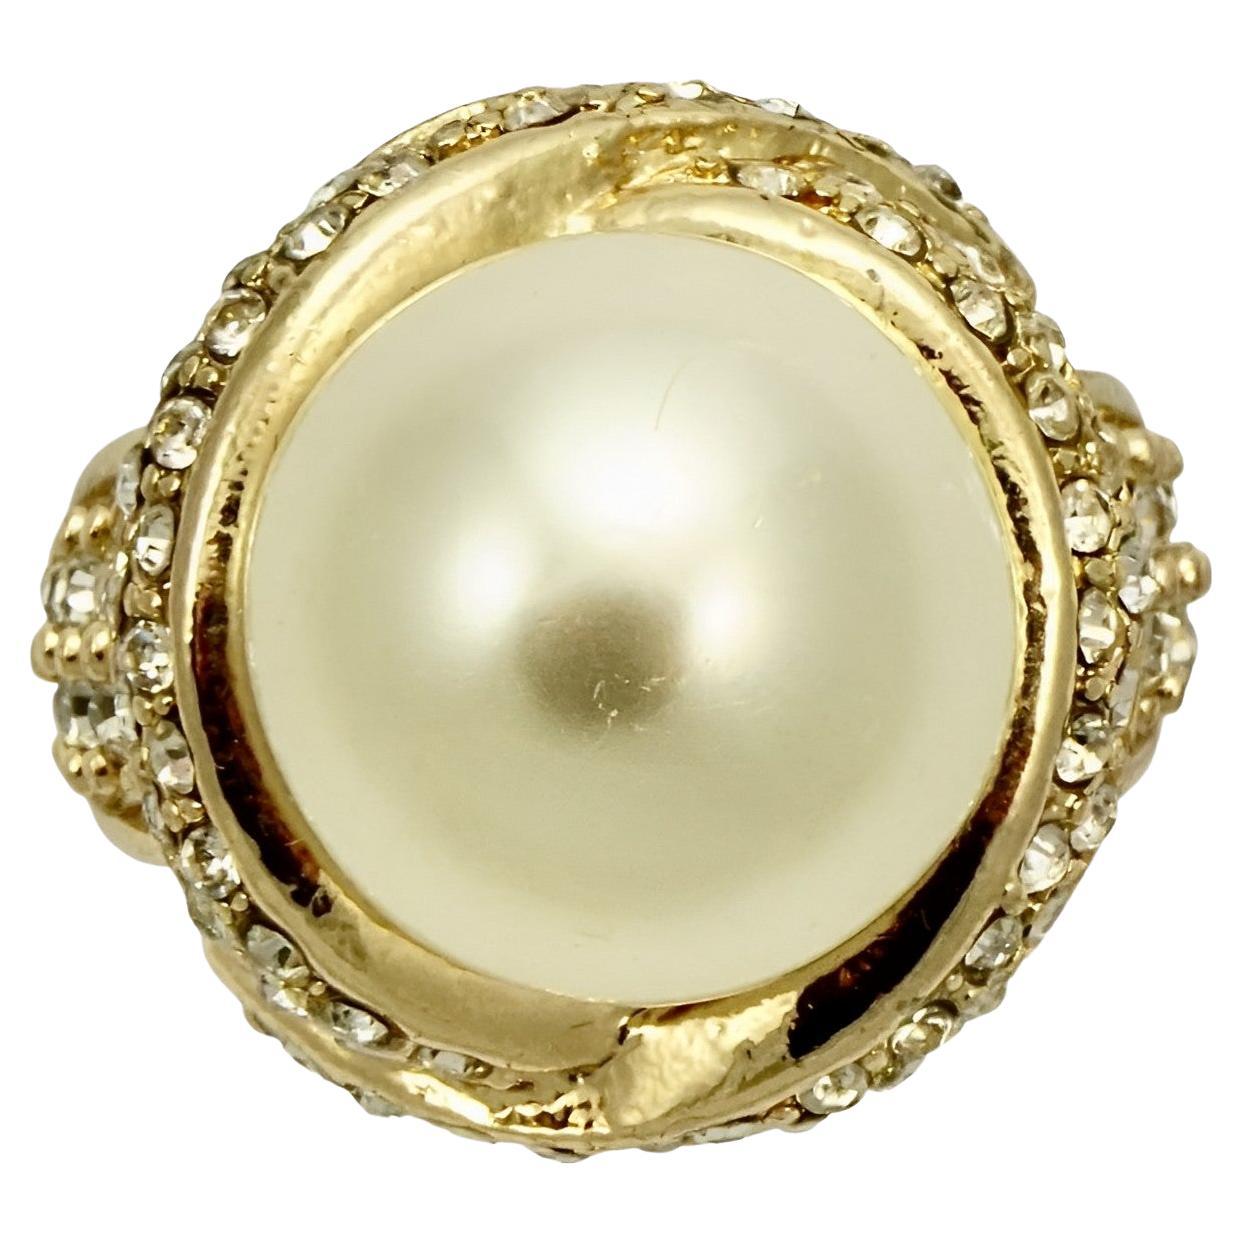 Beautiful gold plated cocktail ring, set with a large faux pearl surrounded by clear crystals. Ring size UK P 1/2, US 7 3/4. Inside diameter 1.9 cm / .74 inch. The faux pearl has some scratching.

This glamorous cocktail ring would make a fabulous